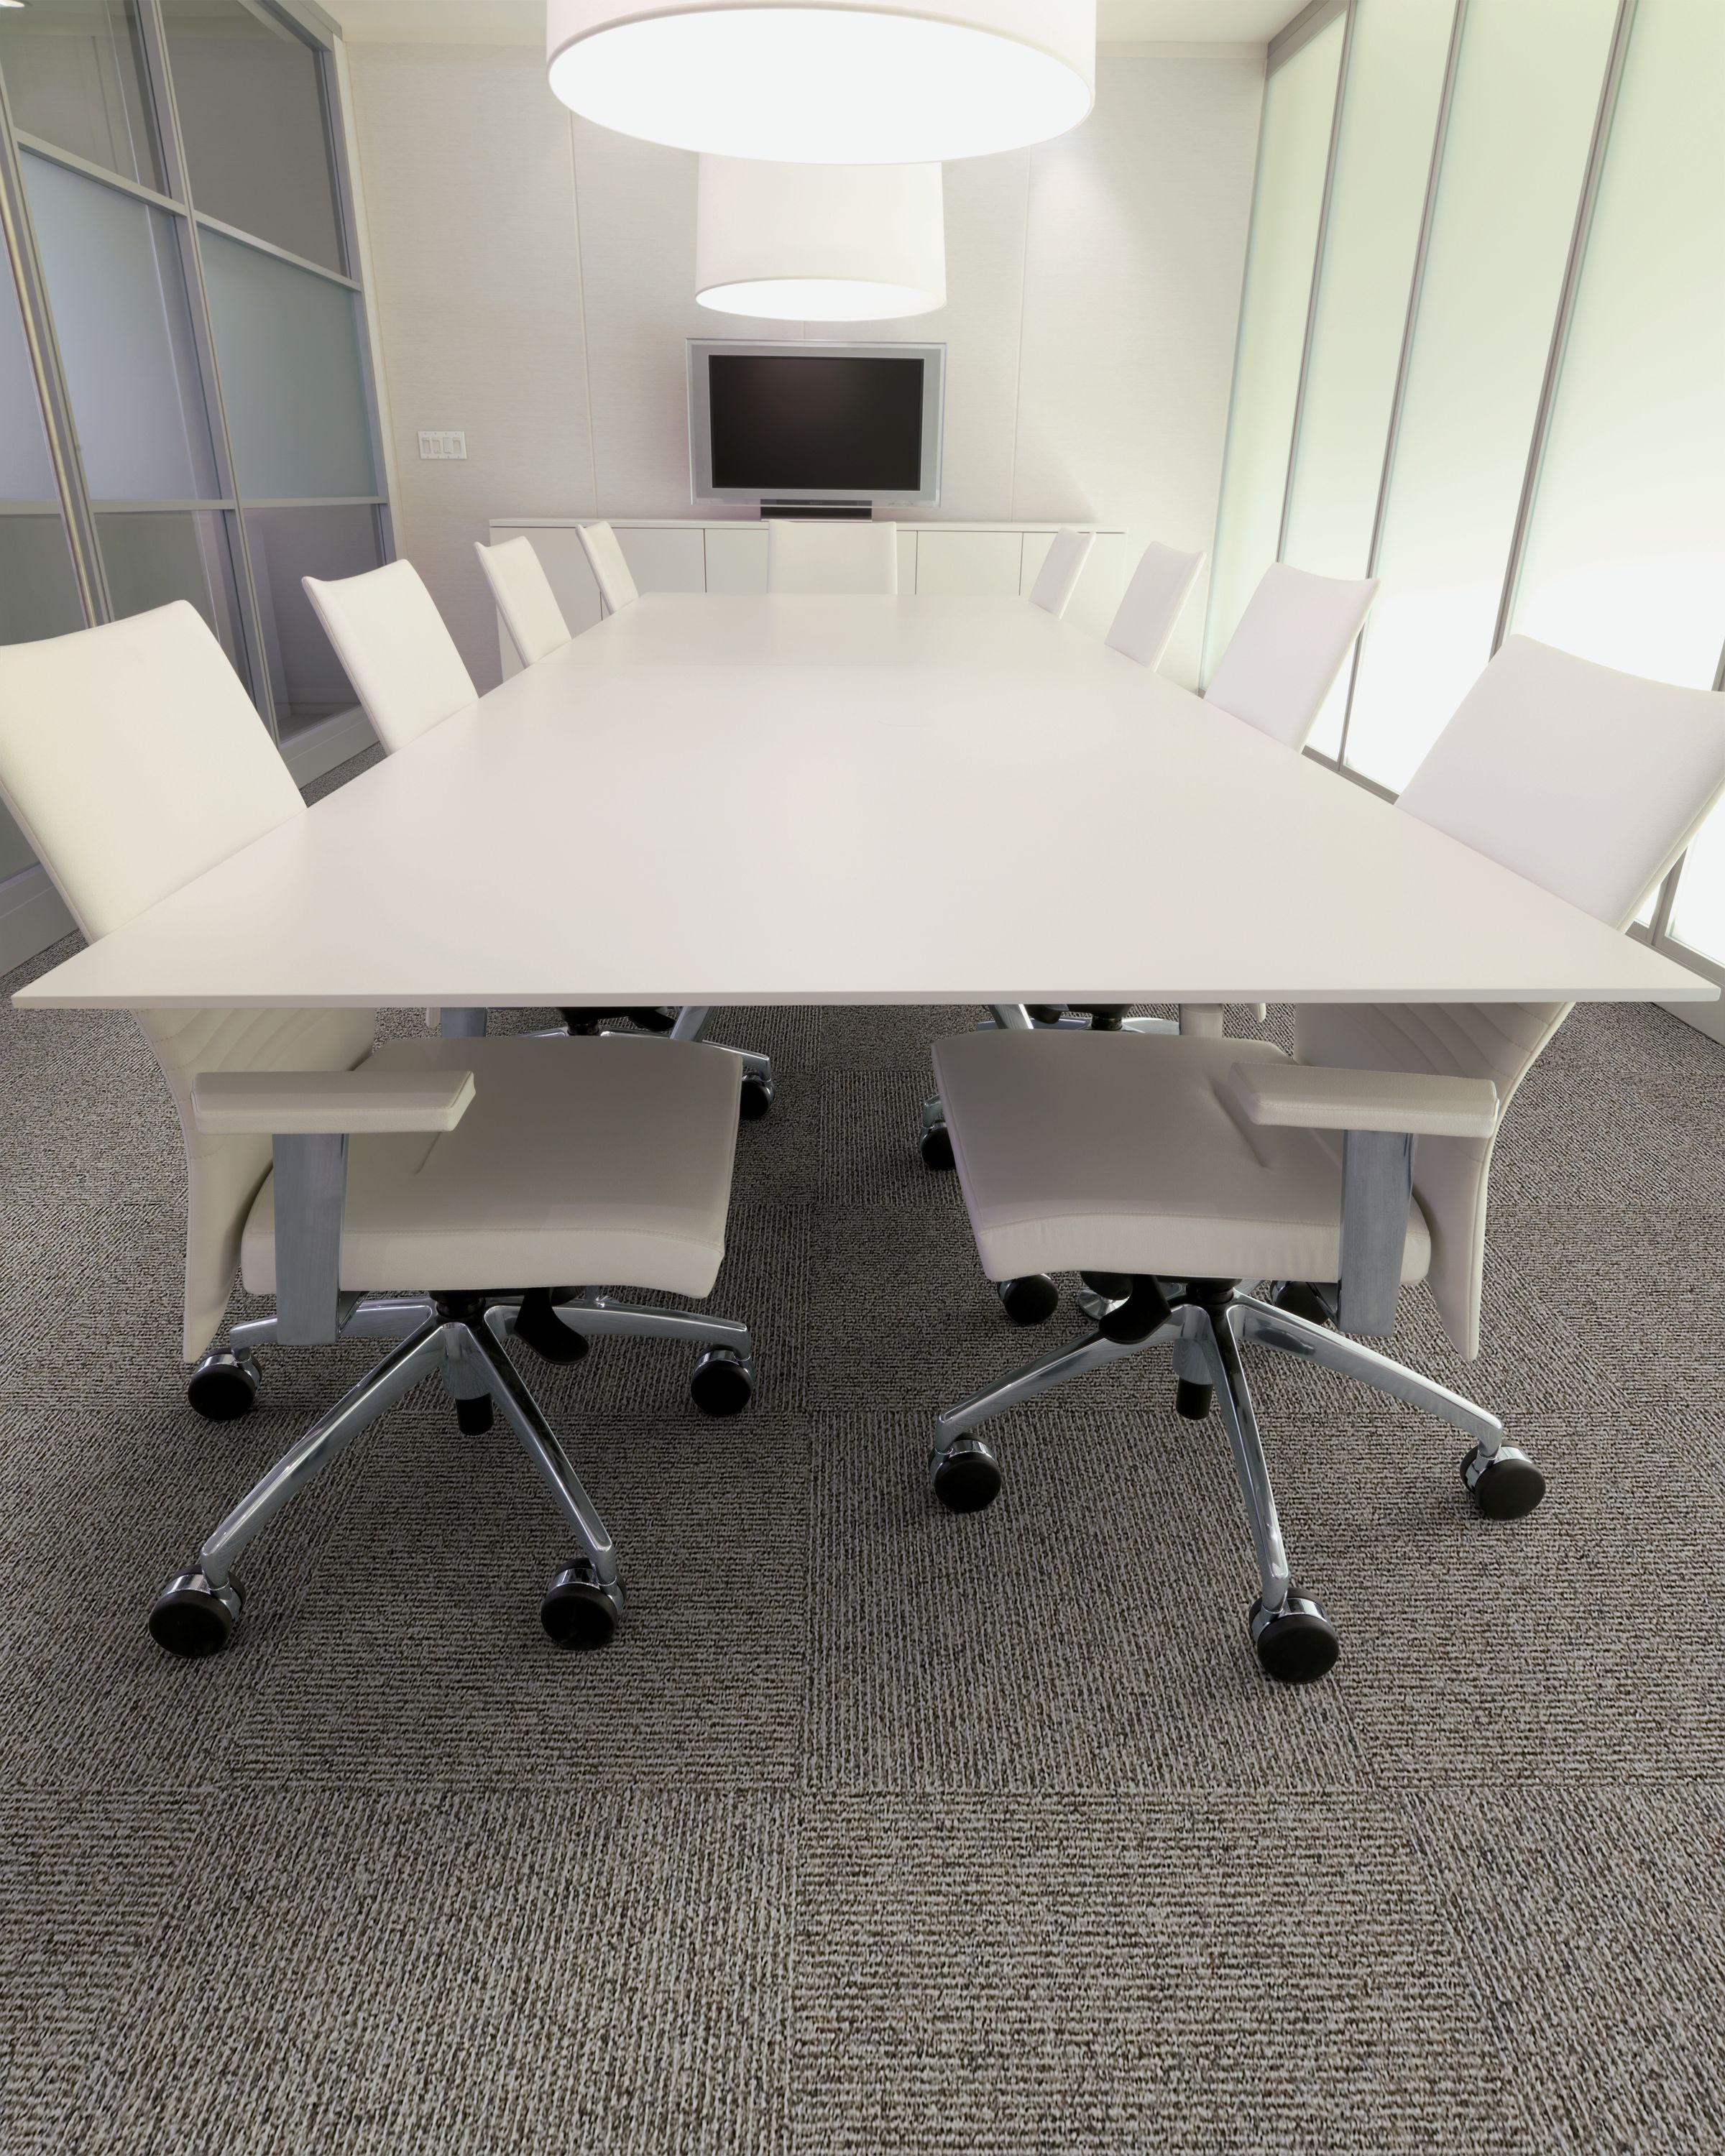 Interface Broomed carpet tile in conference room with long white table and chairs numéro d’image 4